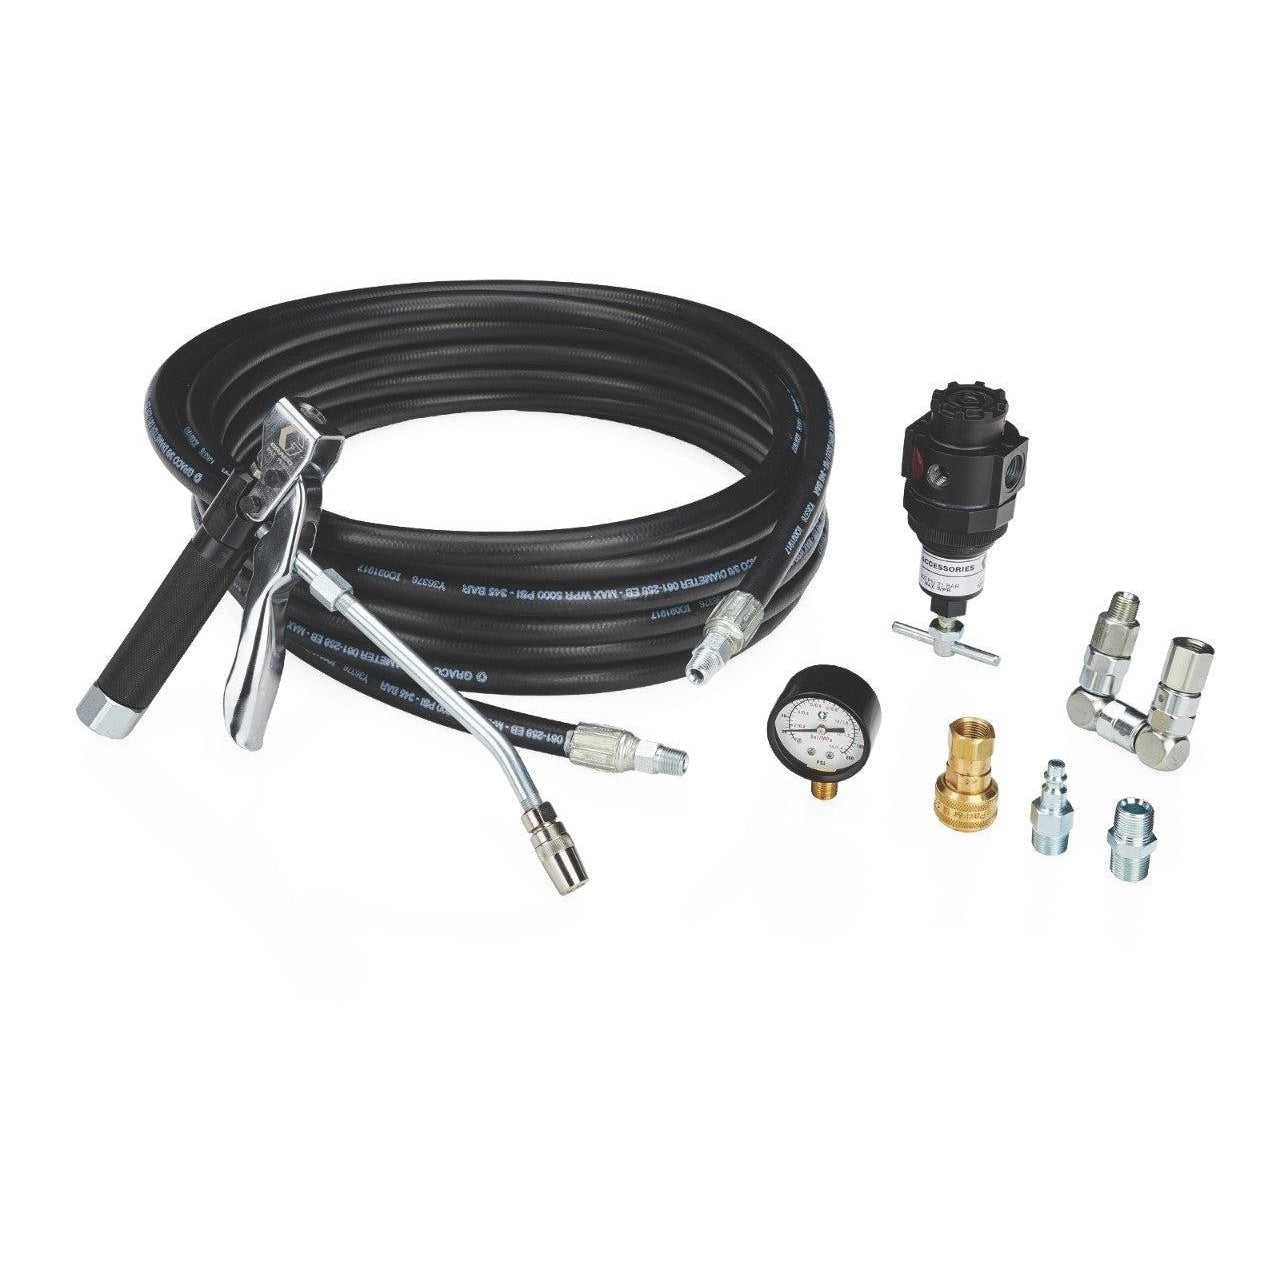 Dispense Kit for Fire-Ball® 300 15:1 Grease Pump Packages - 25 ft (7.6 m) Hose